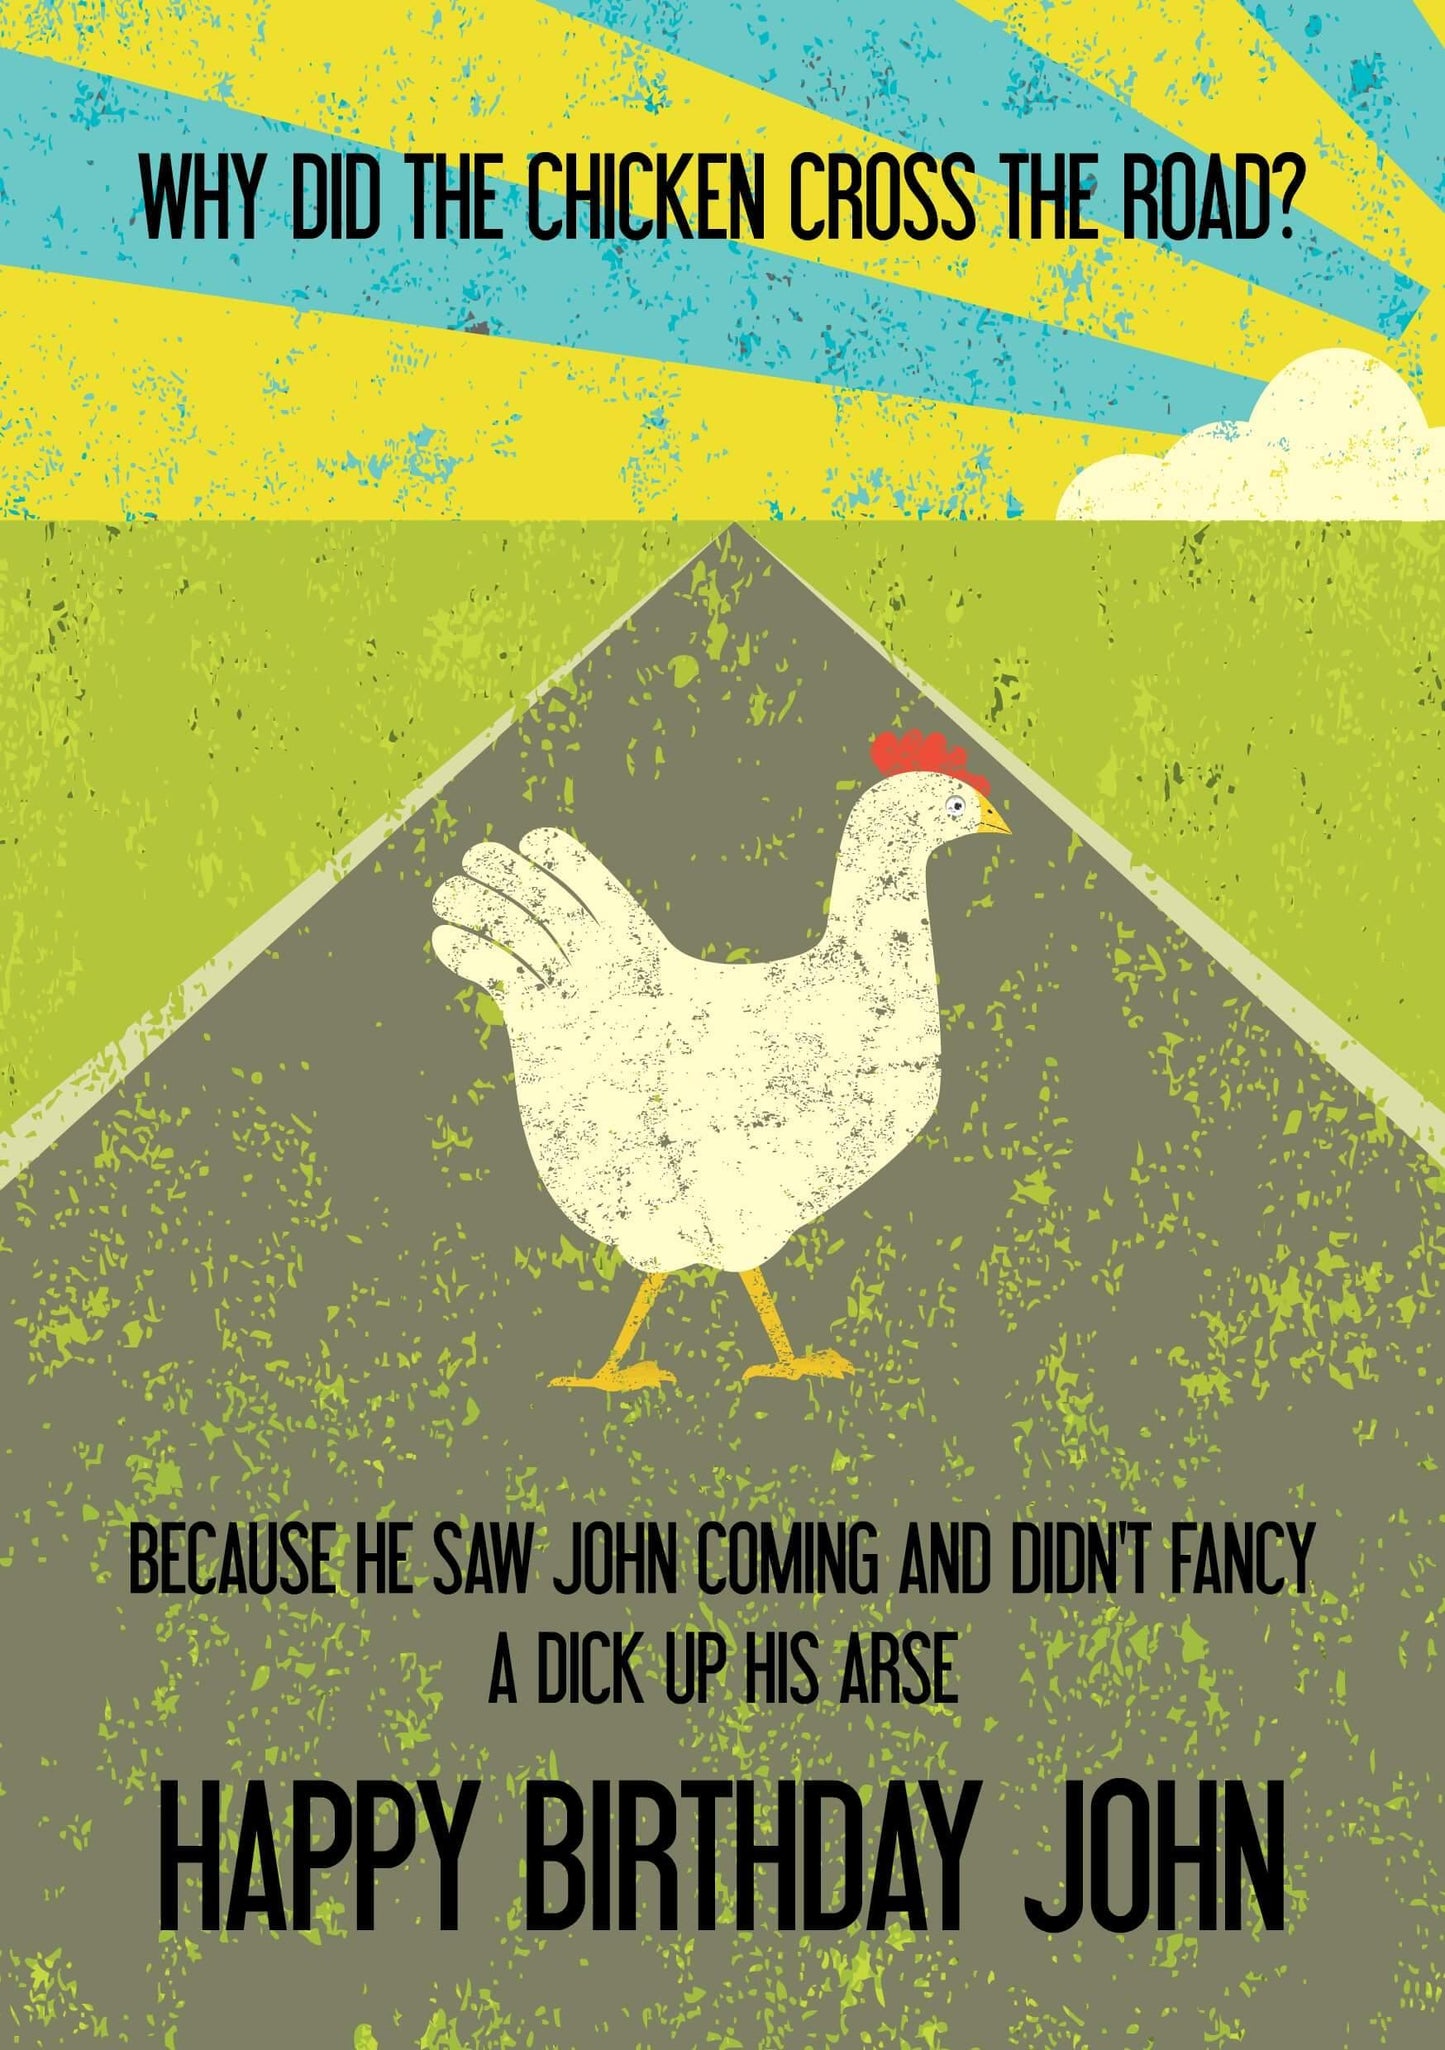 A Twisted Gifts greeting card for Chicken John featuring a chicken crossing the road.